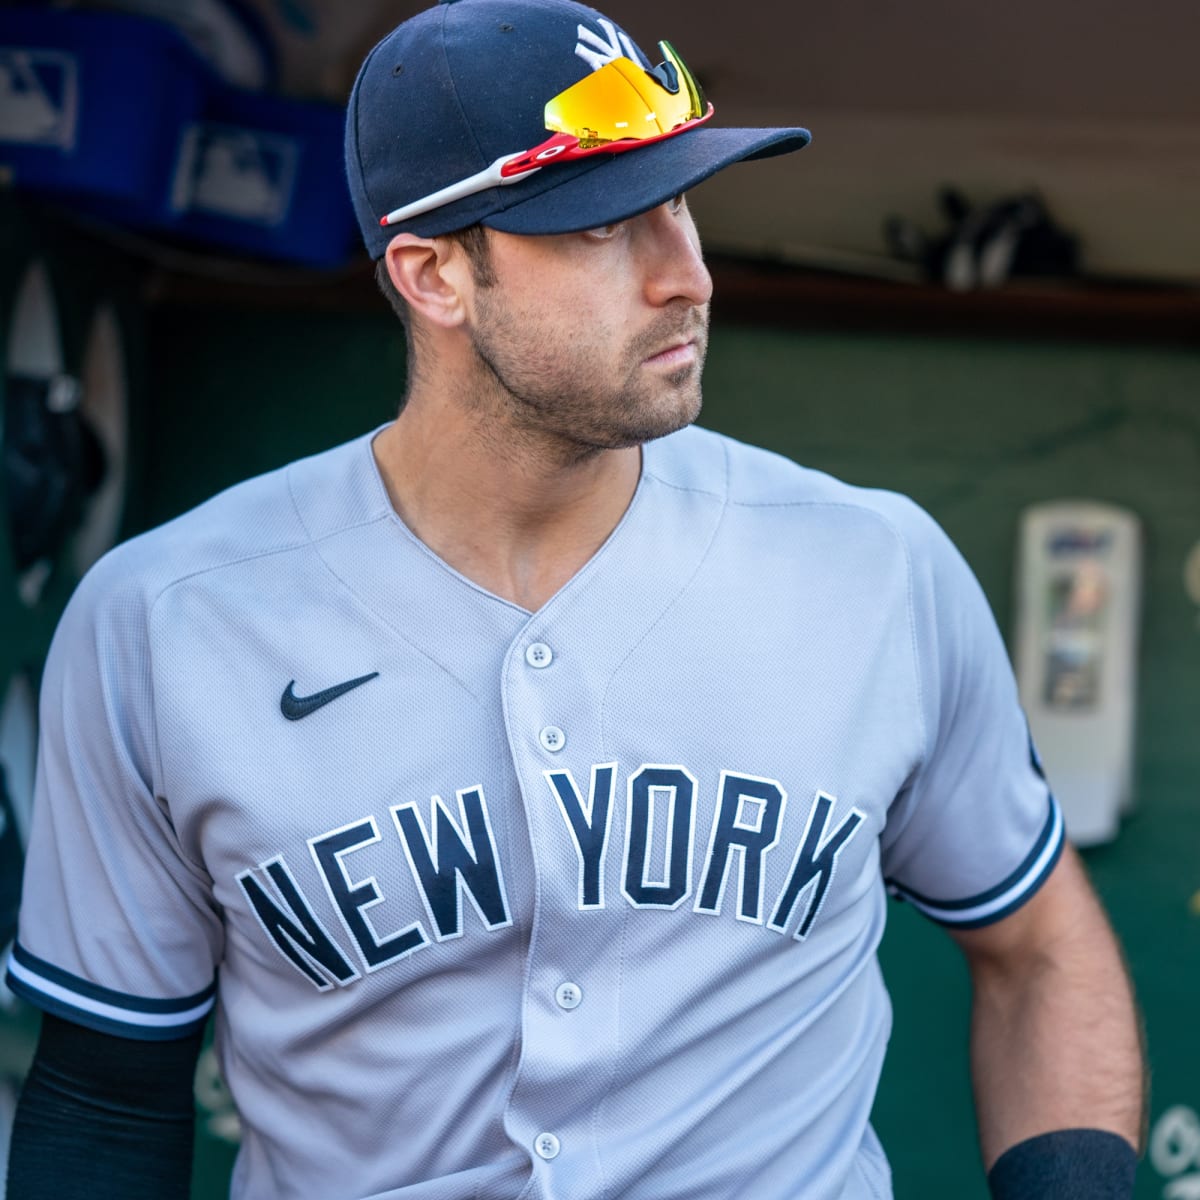 Yankees-Rangers Joey Gallo trade: Scouting report on slugging outfielder 